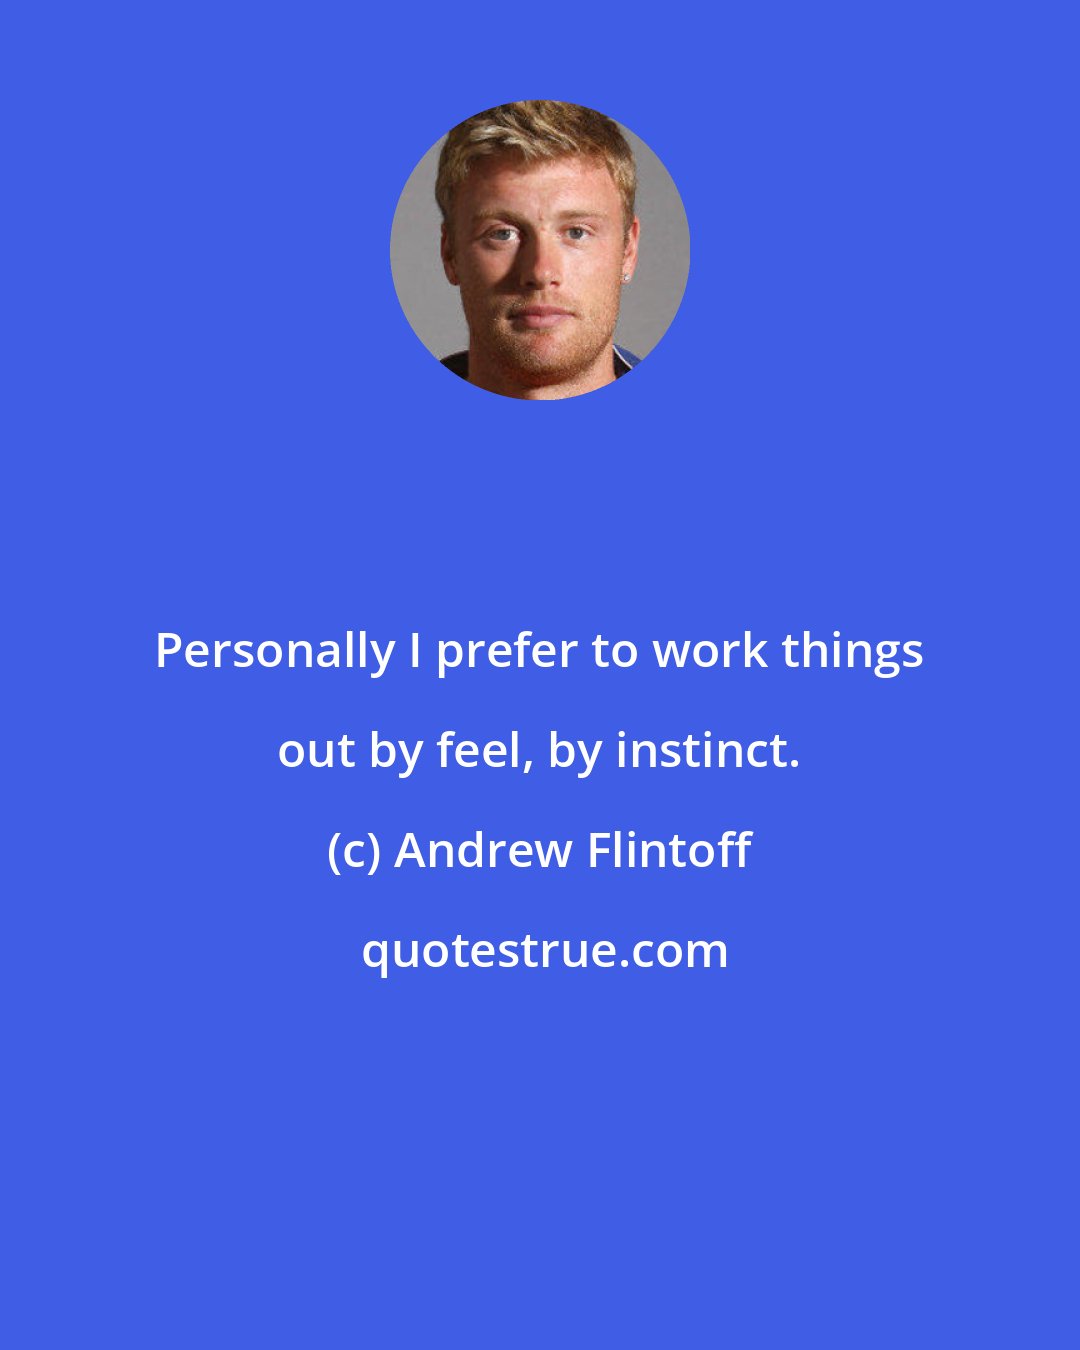 Andrew Flintoff: Personally I prefer to work things out by feel, by instinct.